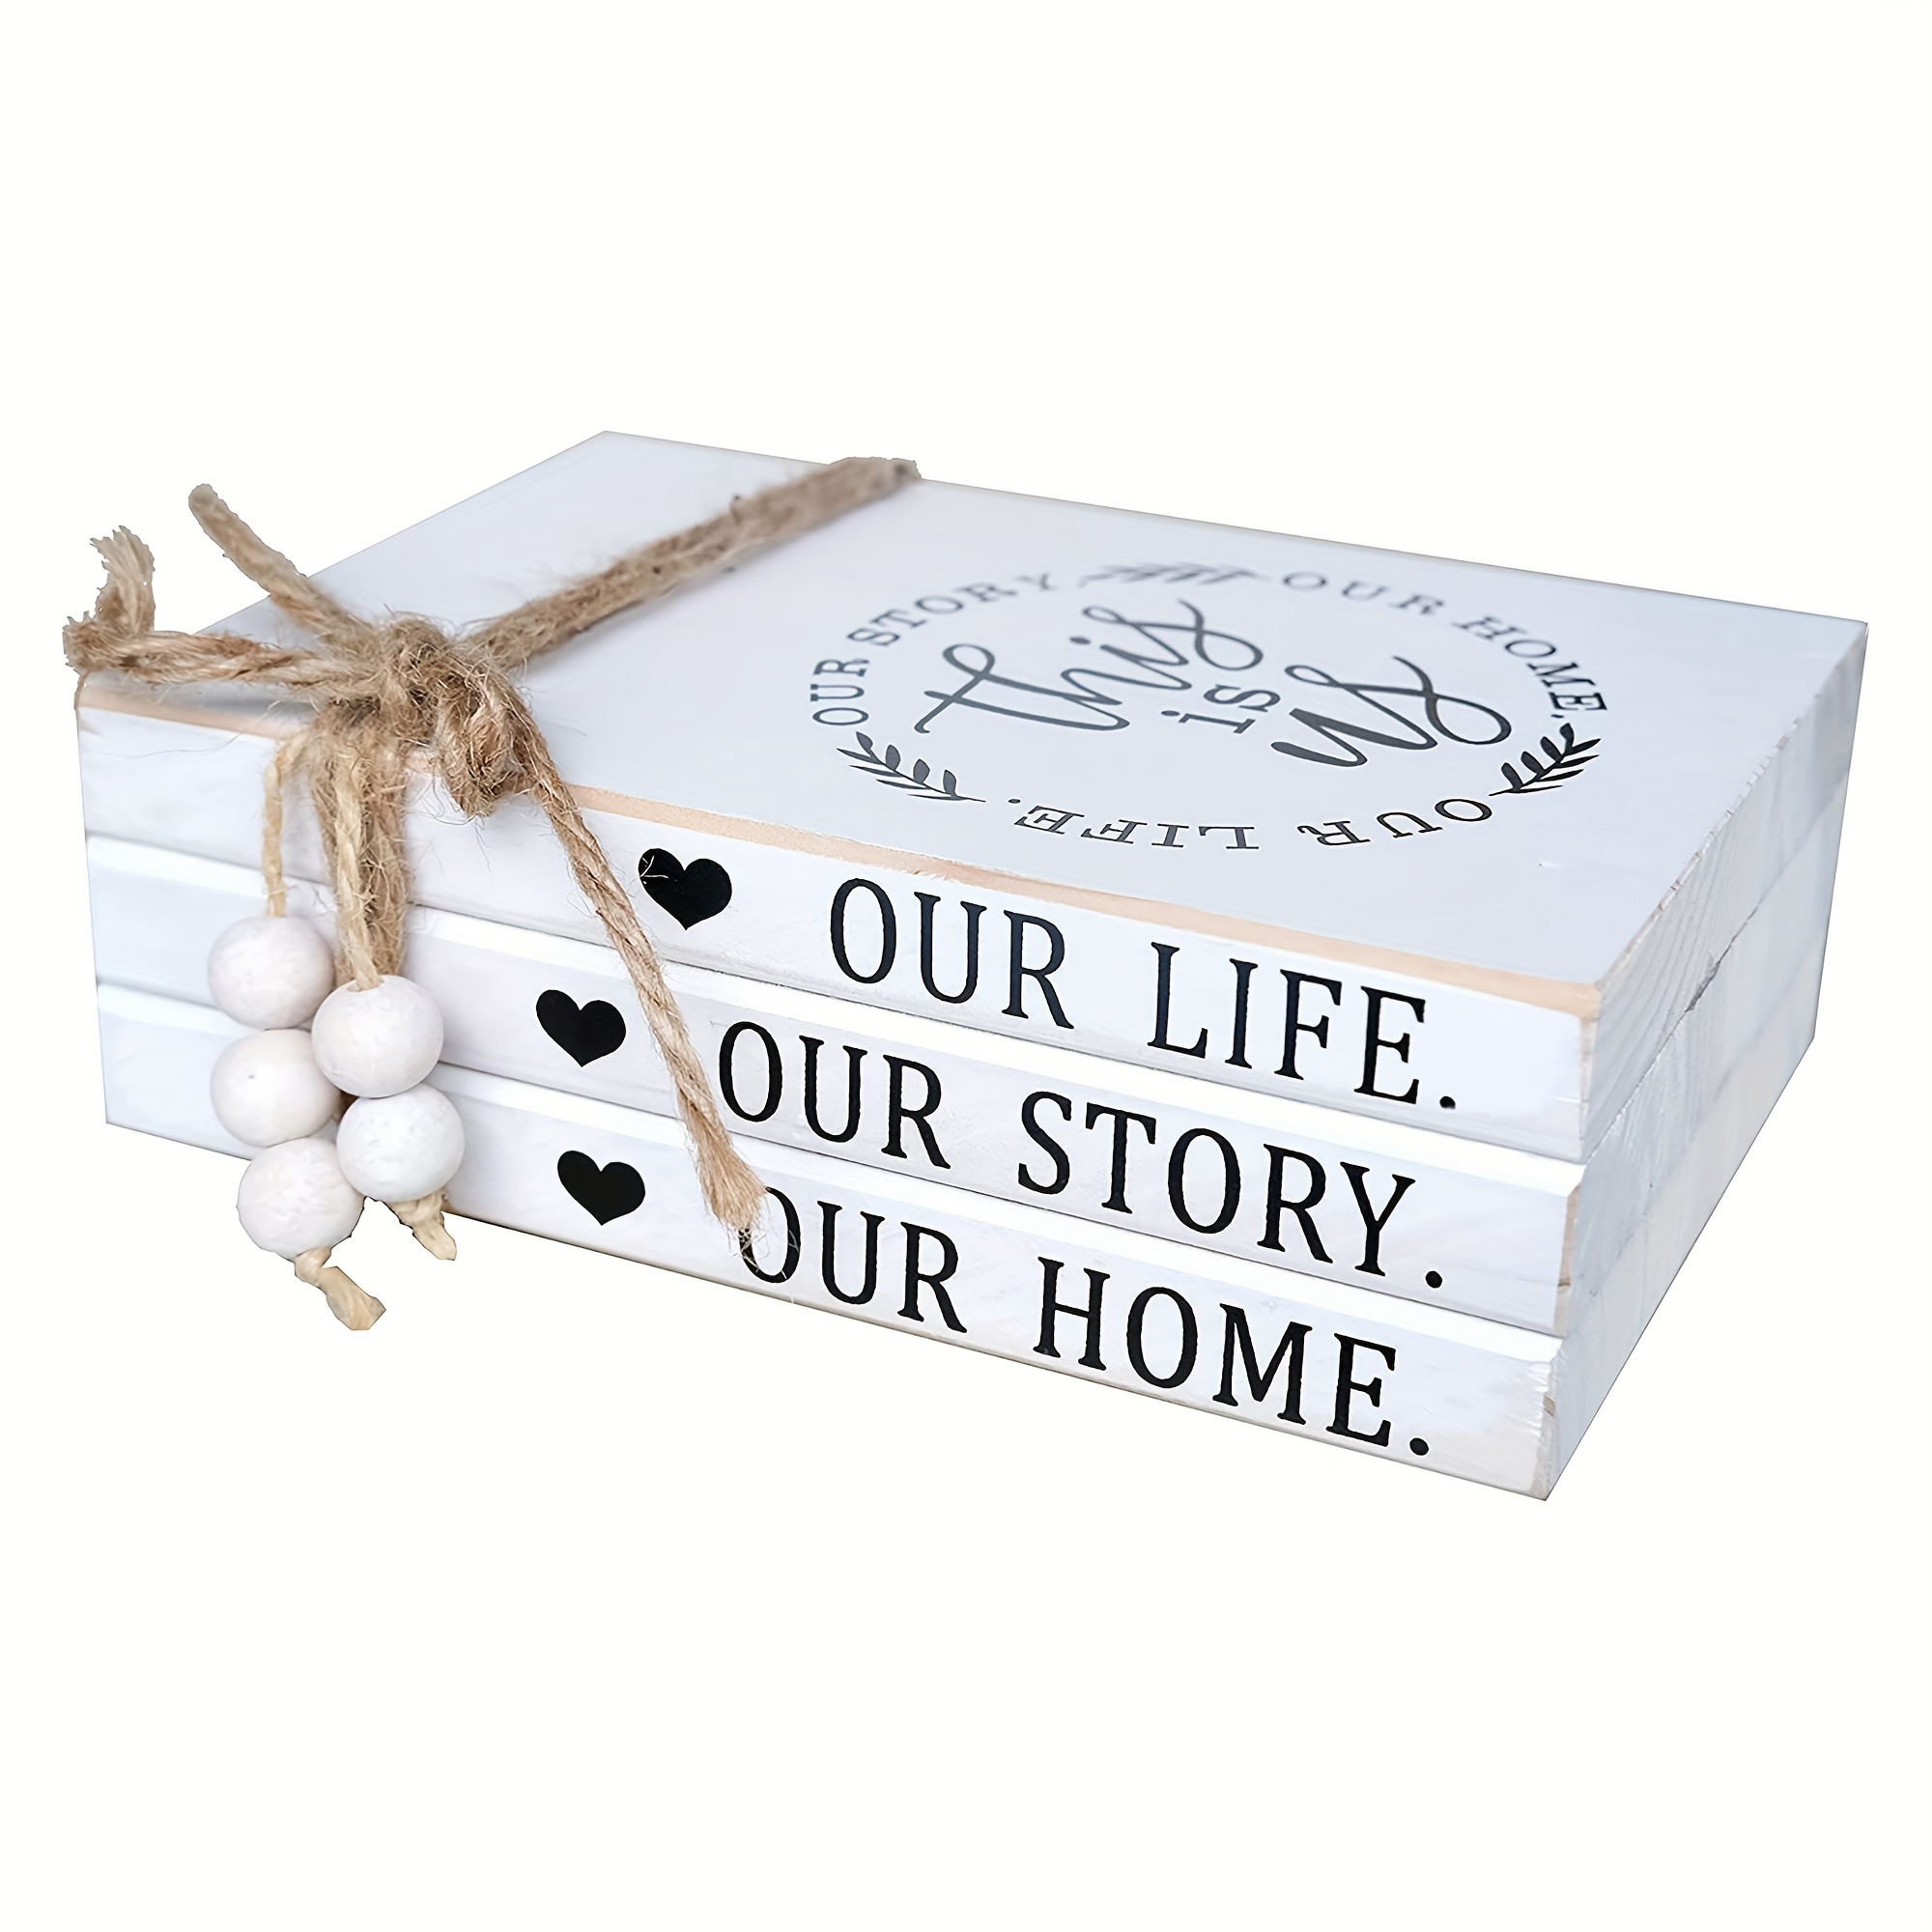 Decorative Books  Home Accessories & Gifts